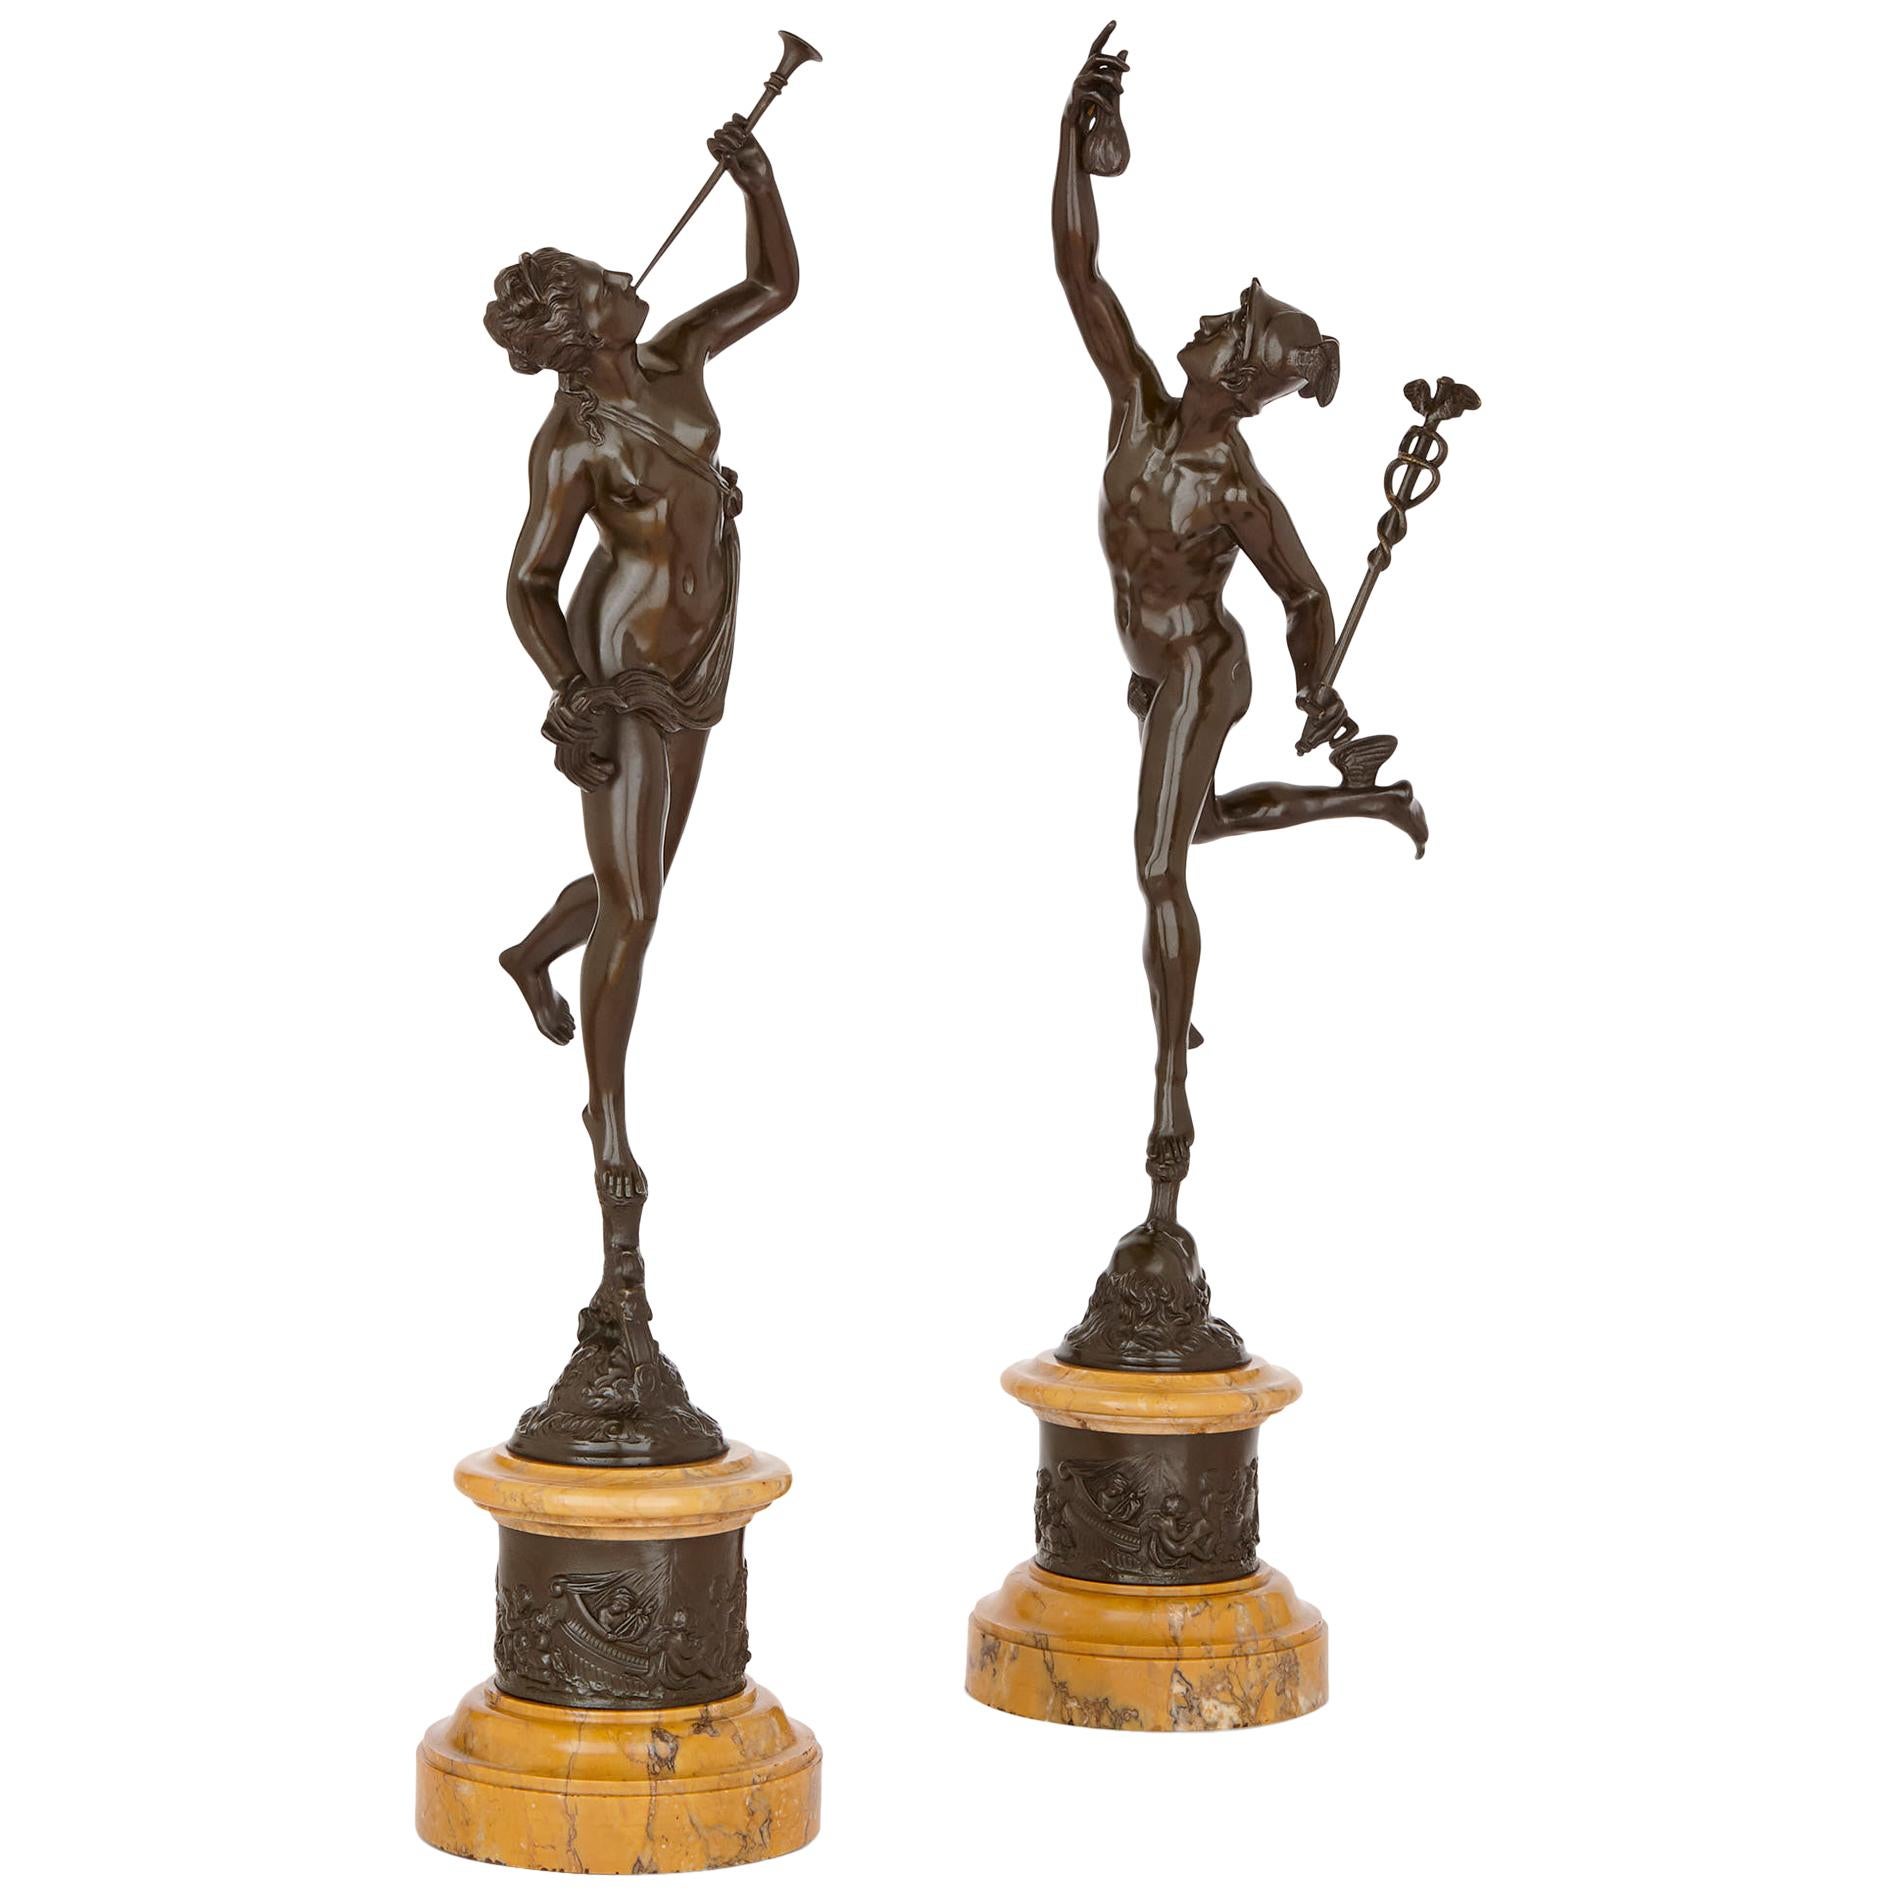 Two Patinated Bronze Sculptures of Mercury and Fortuna after Giambologna